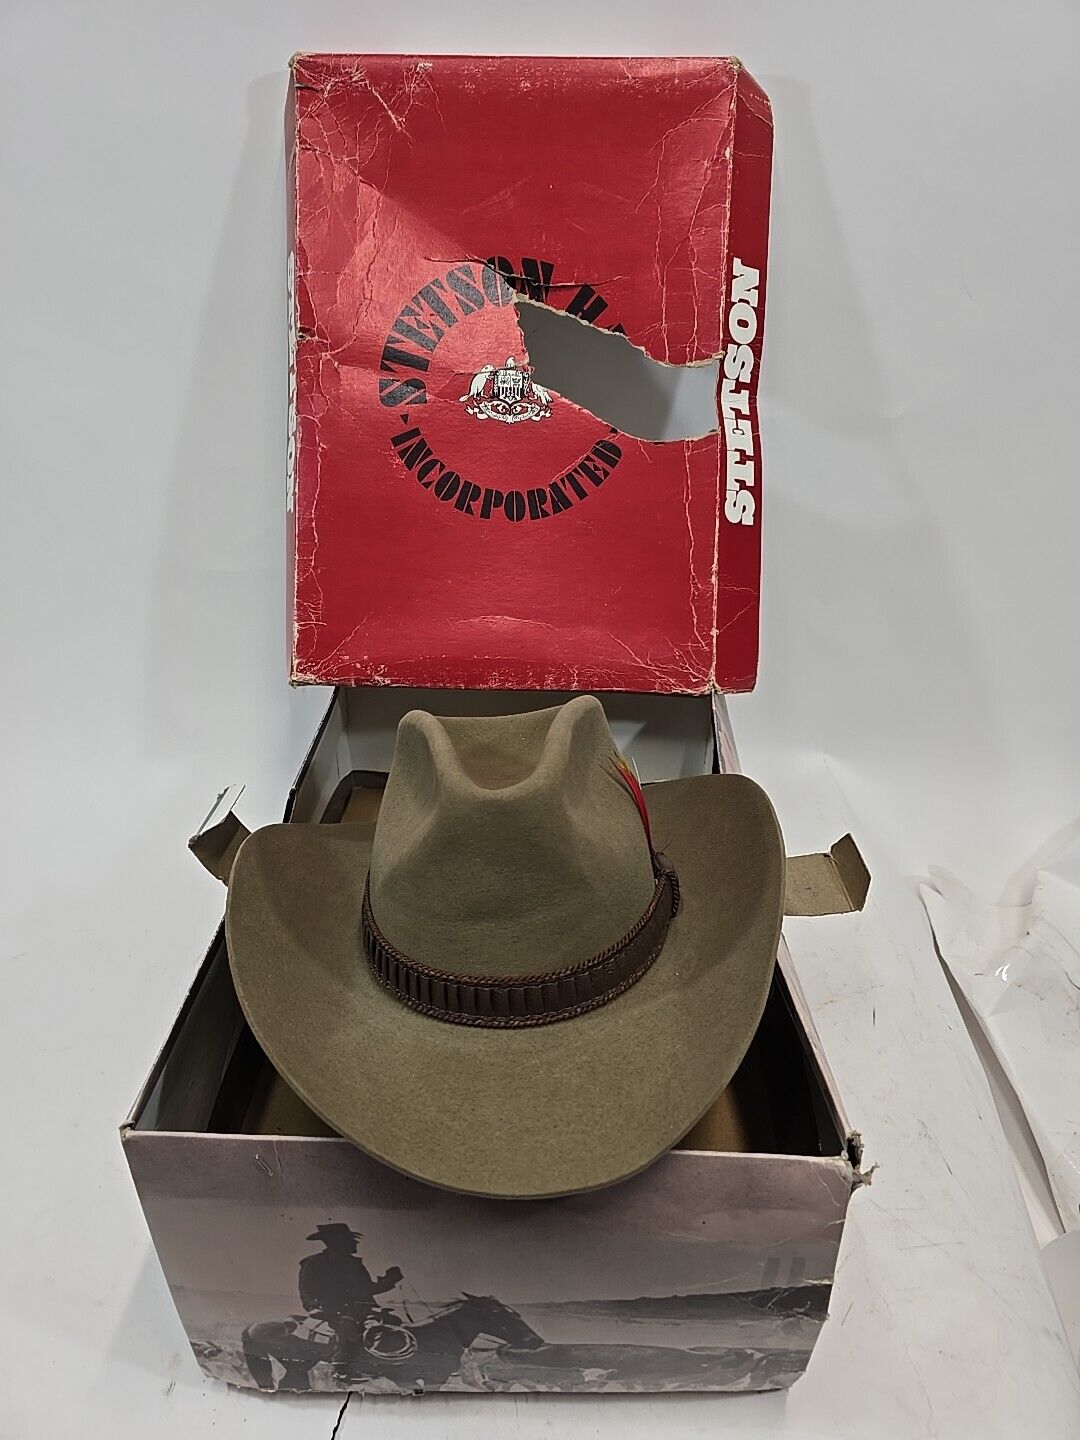 Vintage Stetson Stampede Palomino Beaver Cowboy Hat 3xB Banded Size 7 in Box